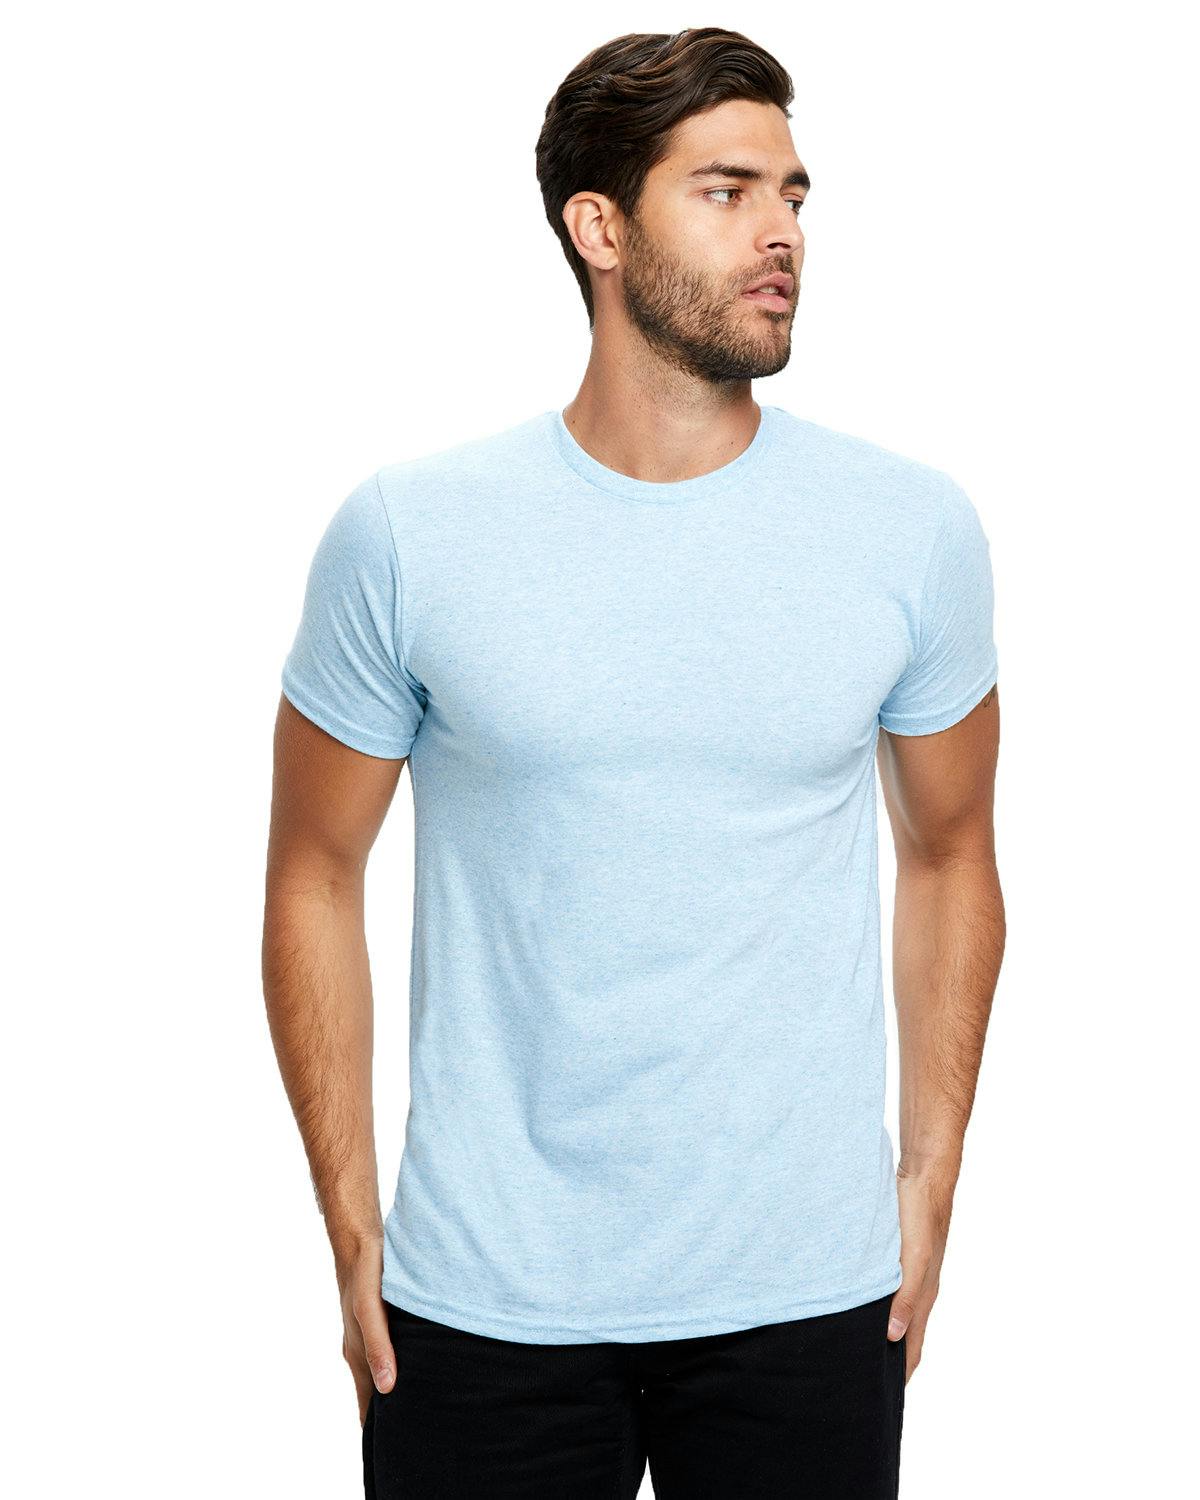 Image for Men's Short-Sleeve Made in USA Triblend T-Shirt